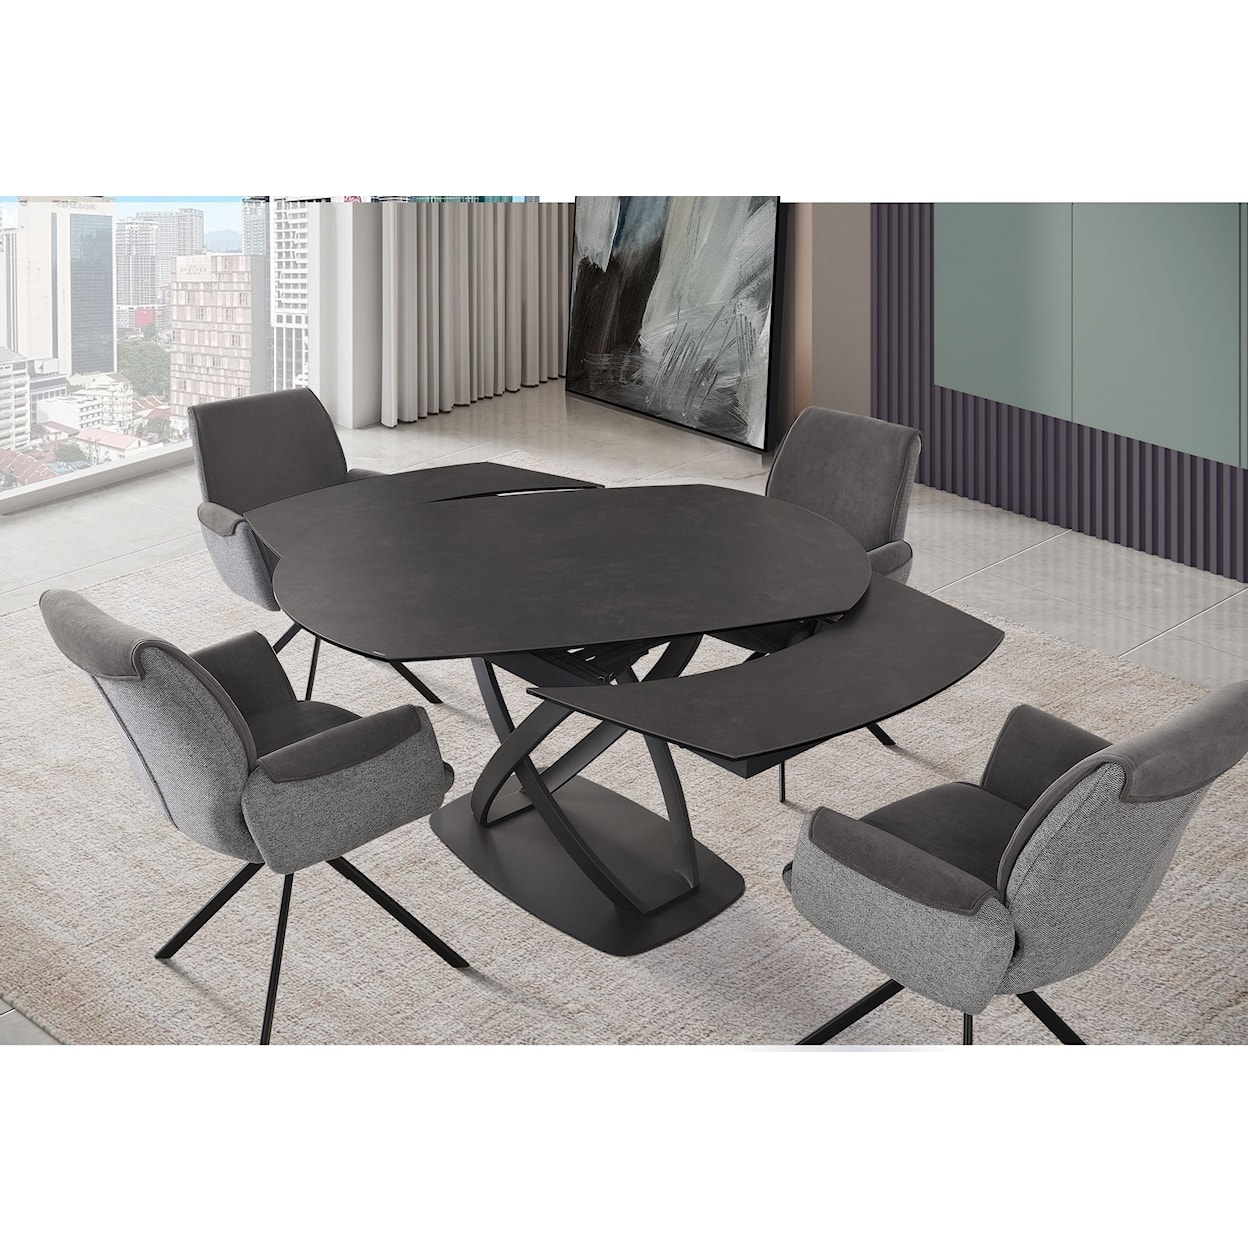 Global Furniture D93021DT Dining Table Set with 4 Dining Chairs